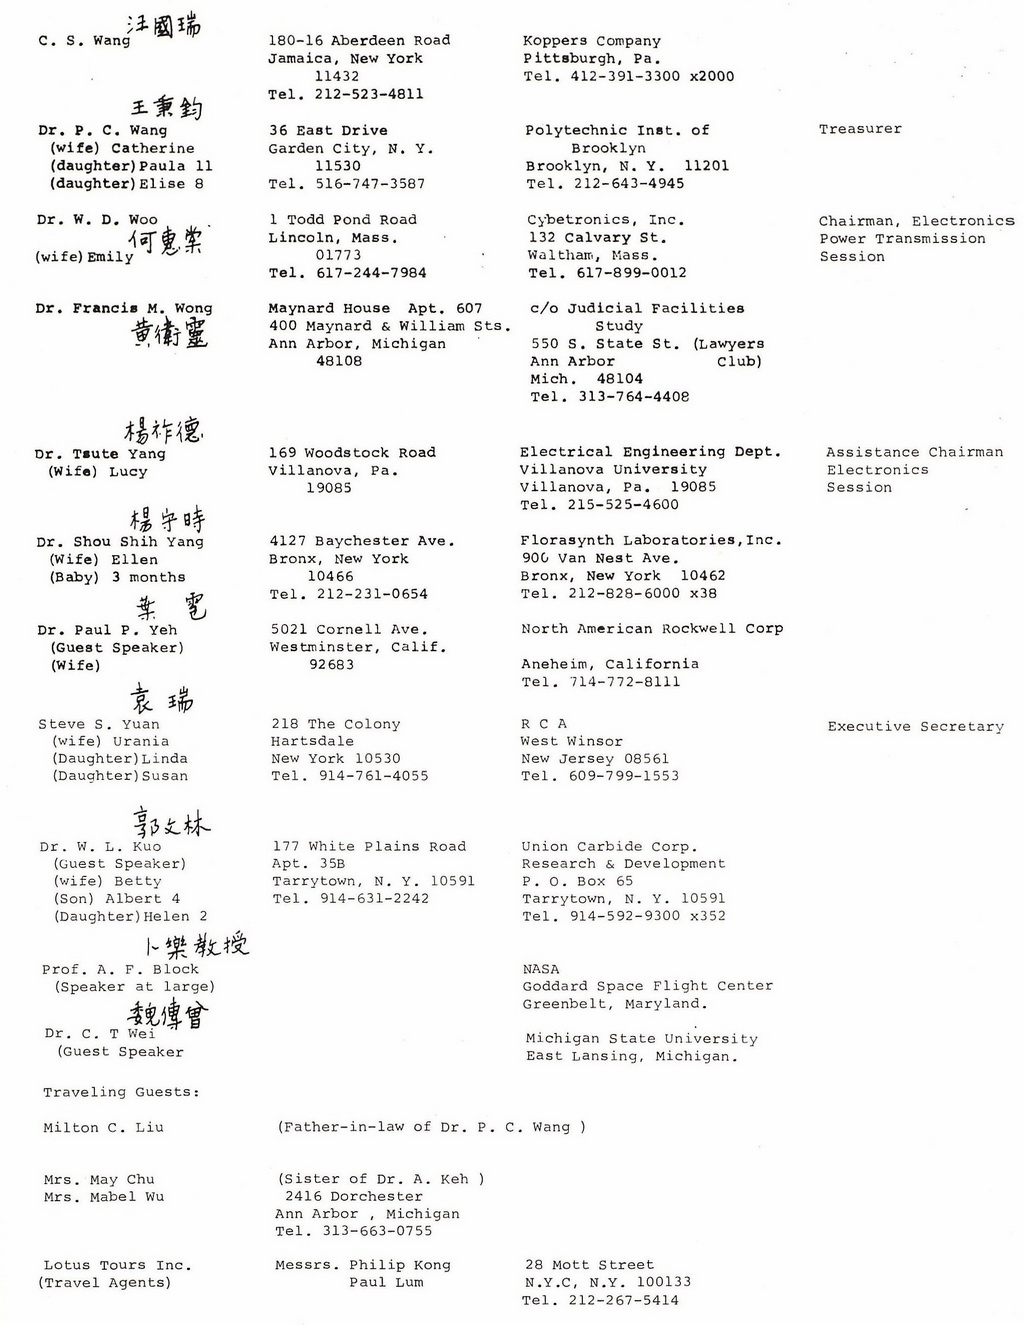 Seminar on Modern Engineering and Technology 1968 CIE-NY List of speakers